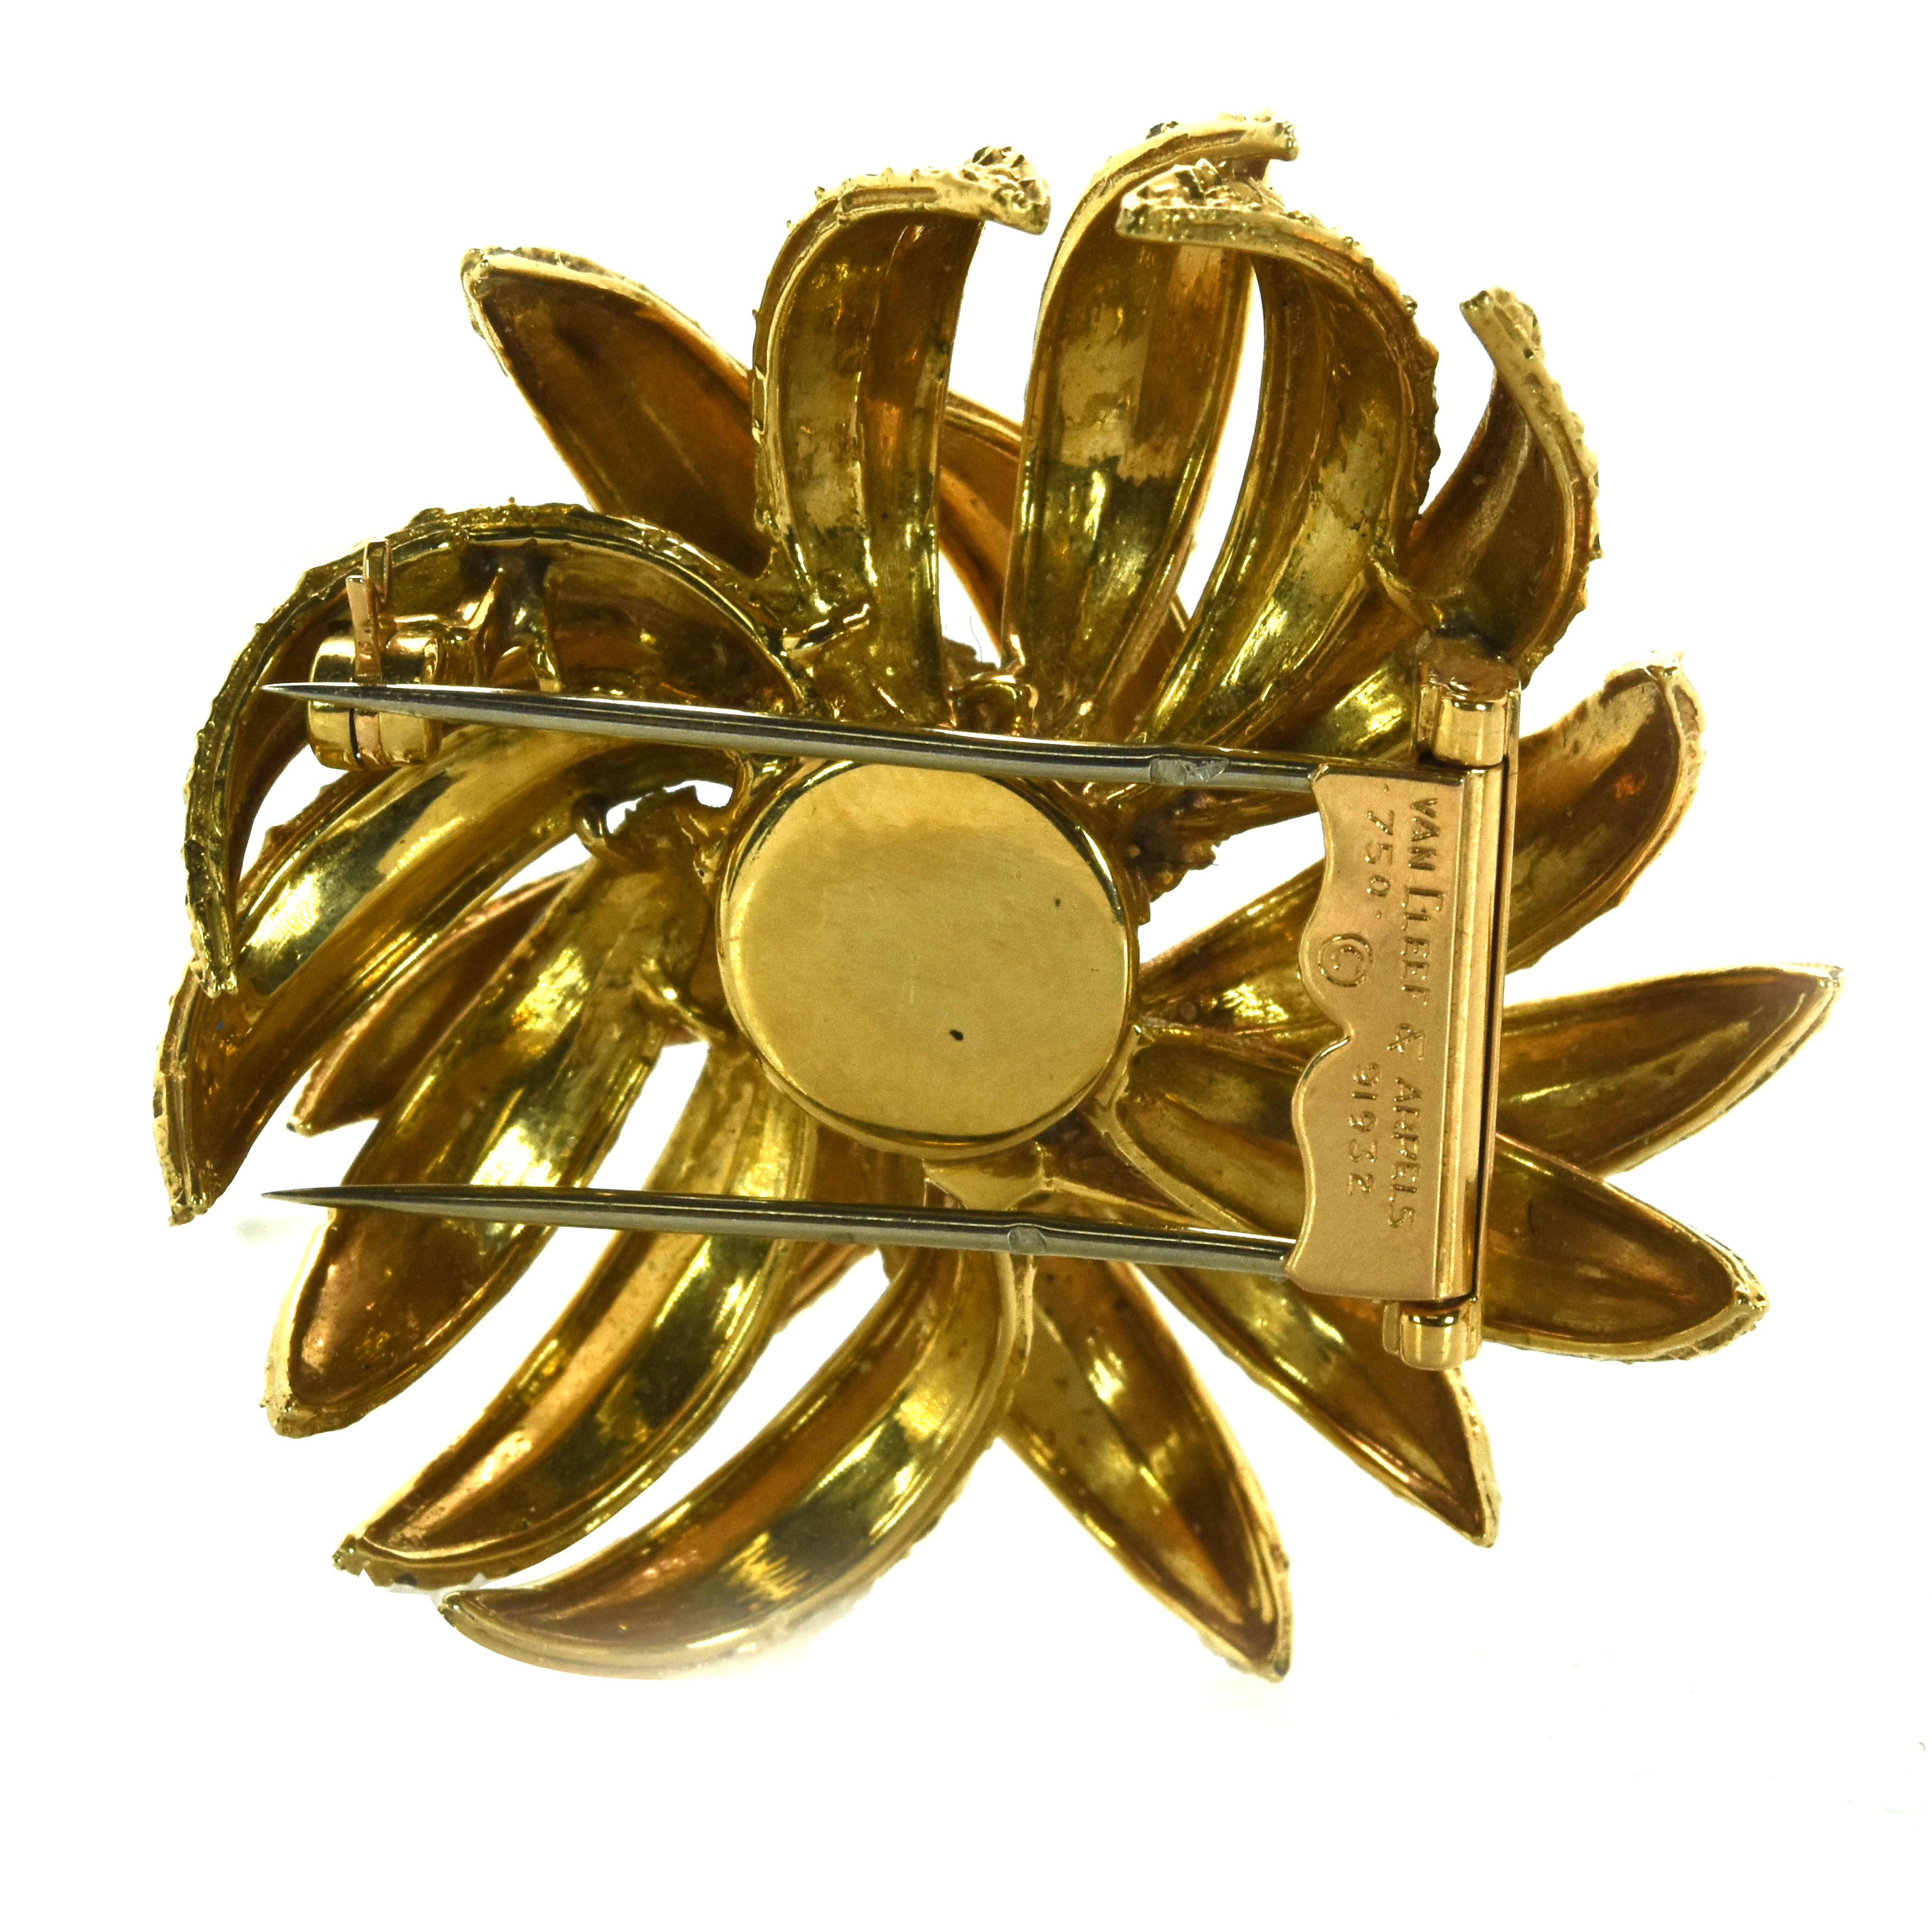 A yellow gold brooch by Van Cleef & Arpels. The brooch is made in 18k yellow gold and weighs 14.9dwts. The brooch is signed and numbered by Van Cleef and bears French Hallmarks